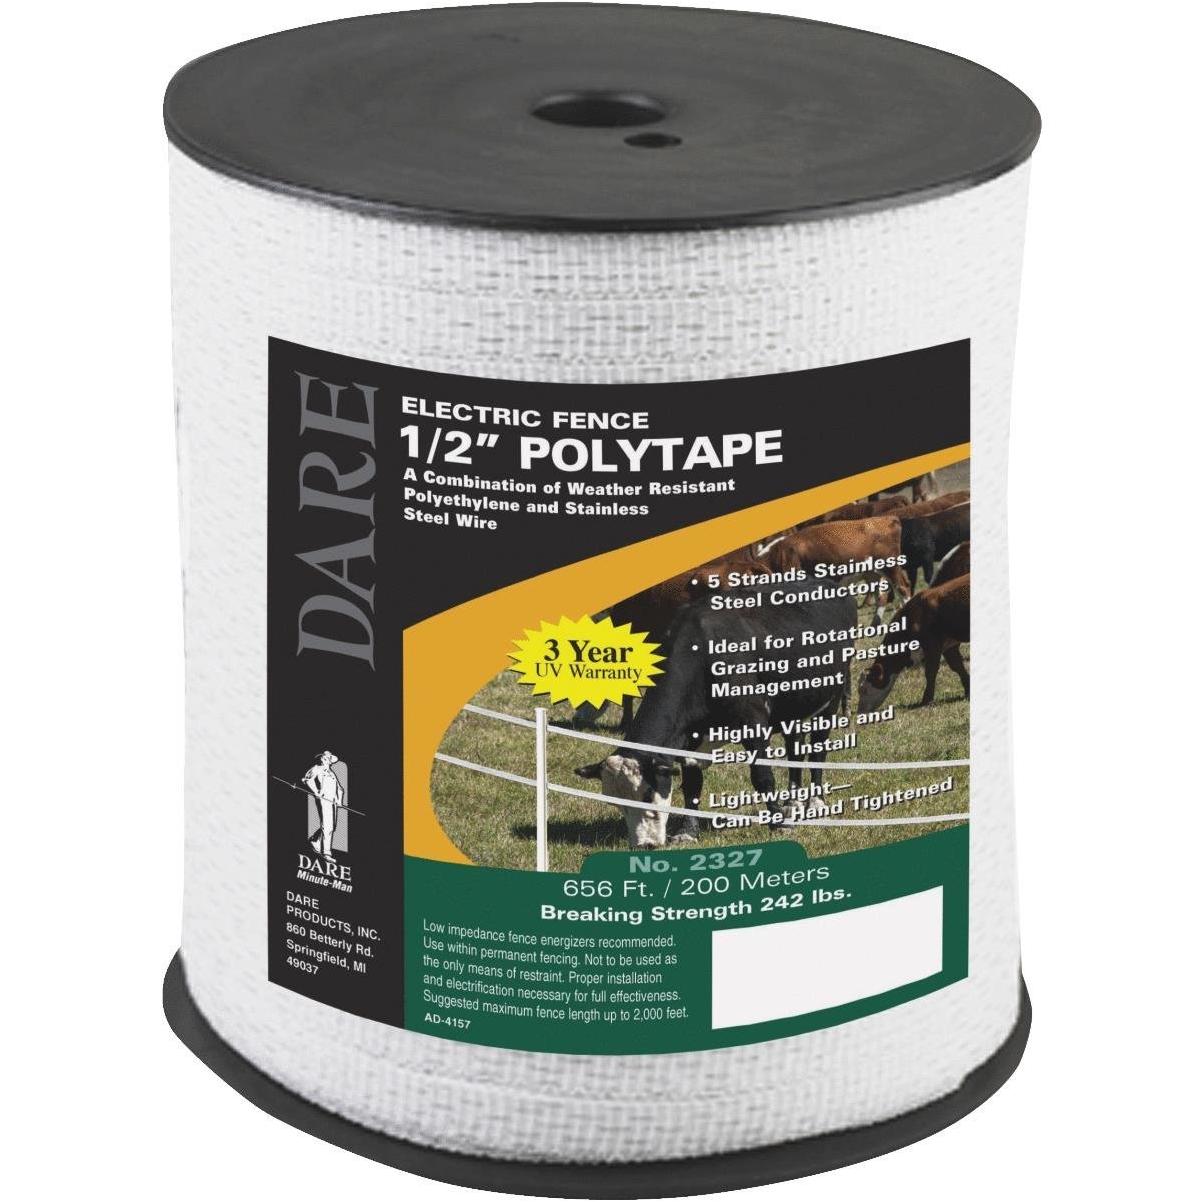 EASY TAPE TAPE INSULATORS x 25 Electric Fencing Fence Poly Tape Rope Wire 